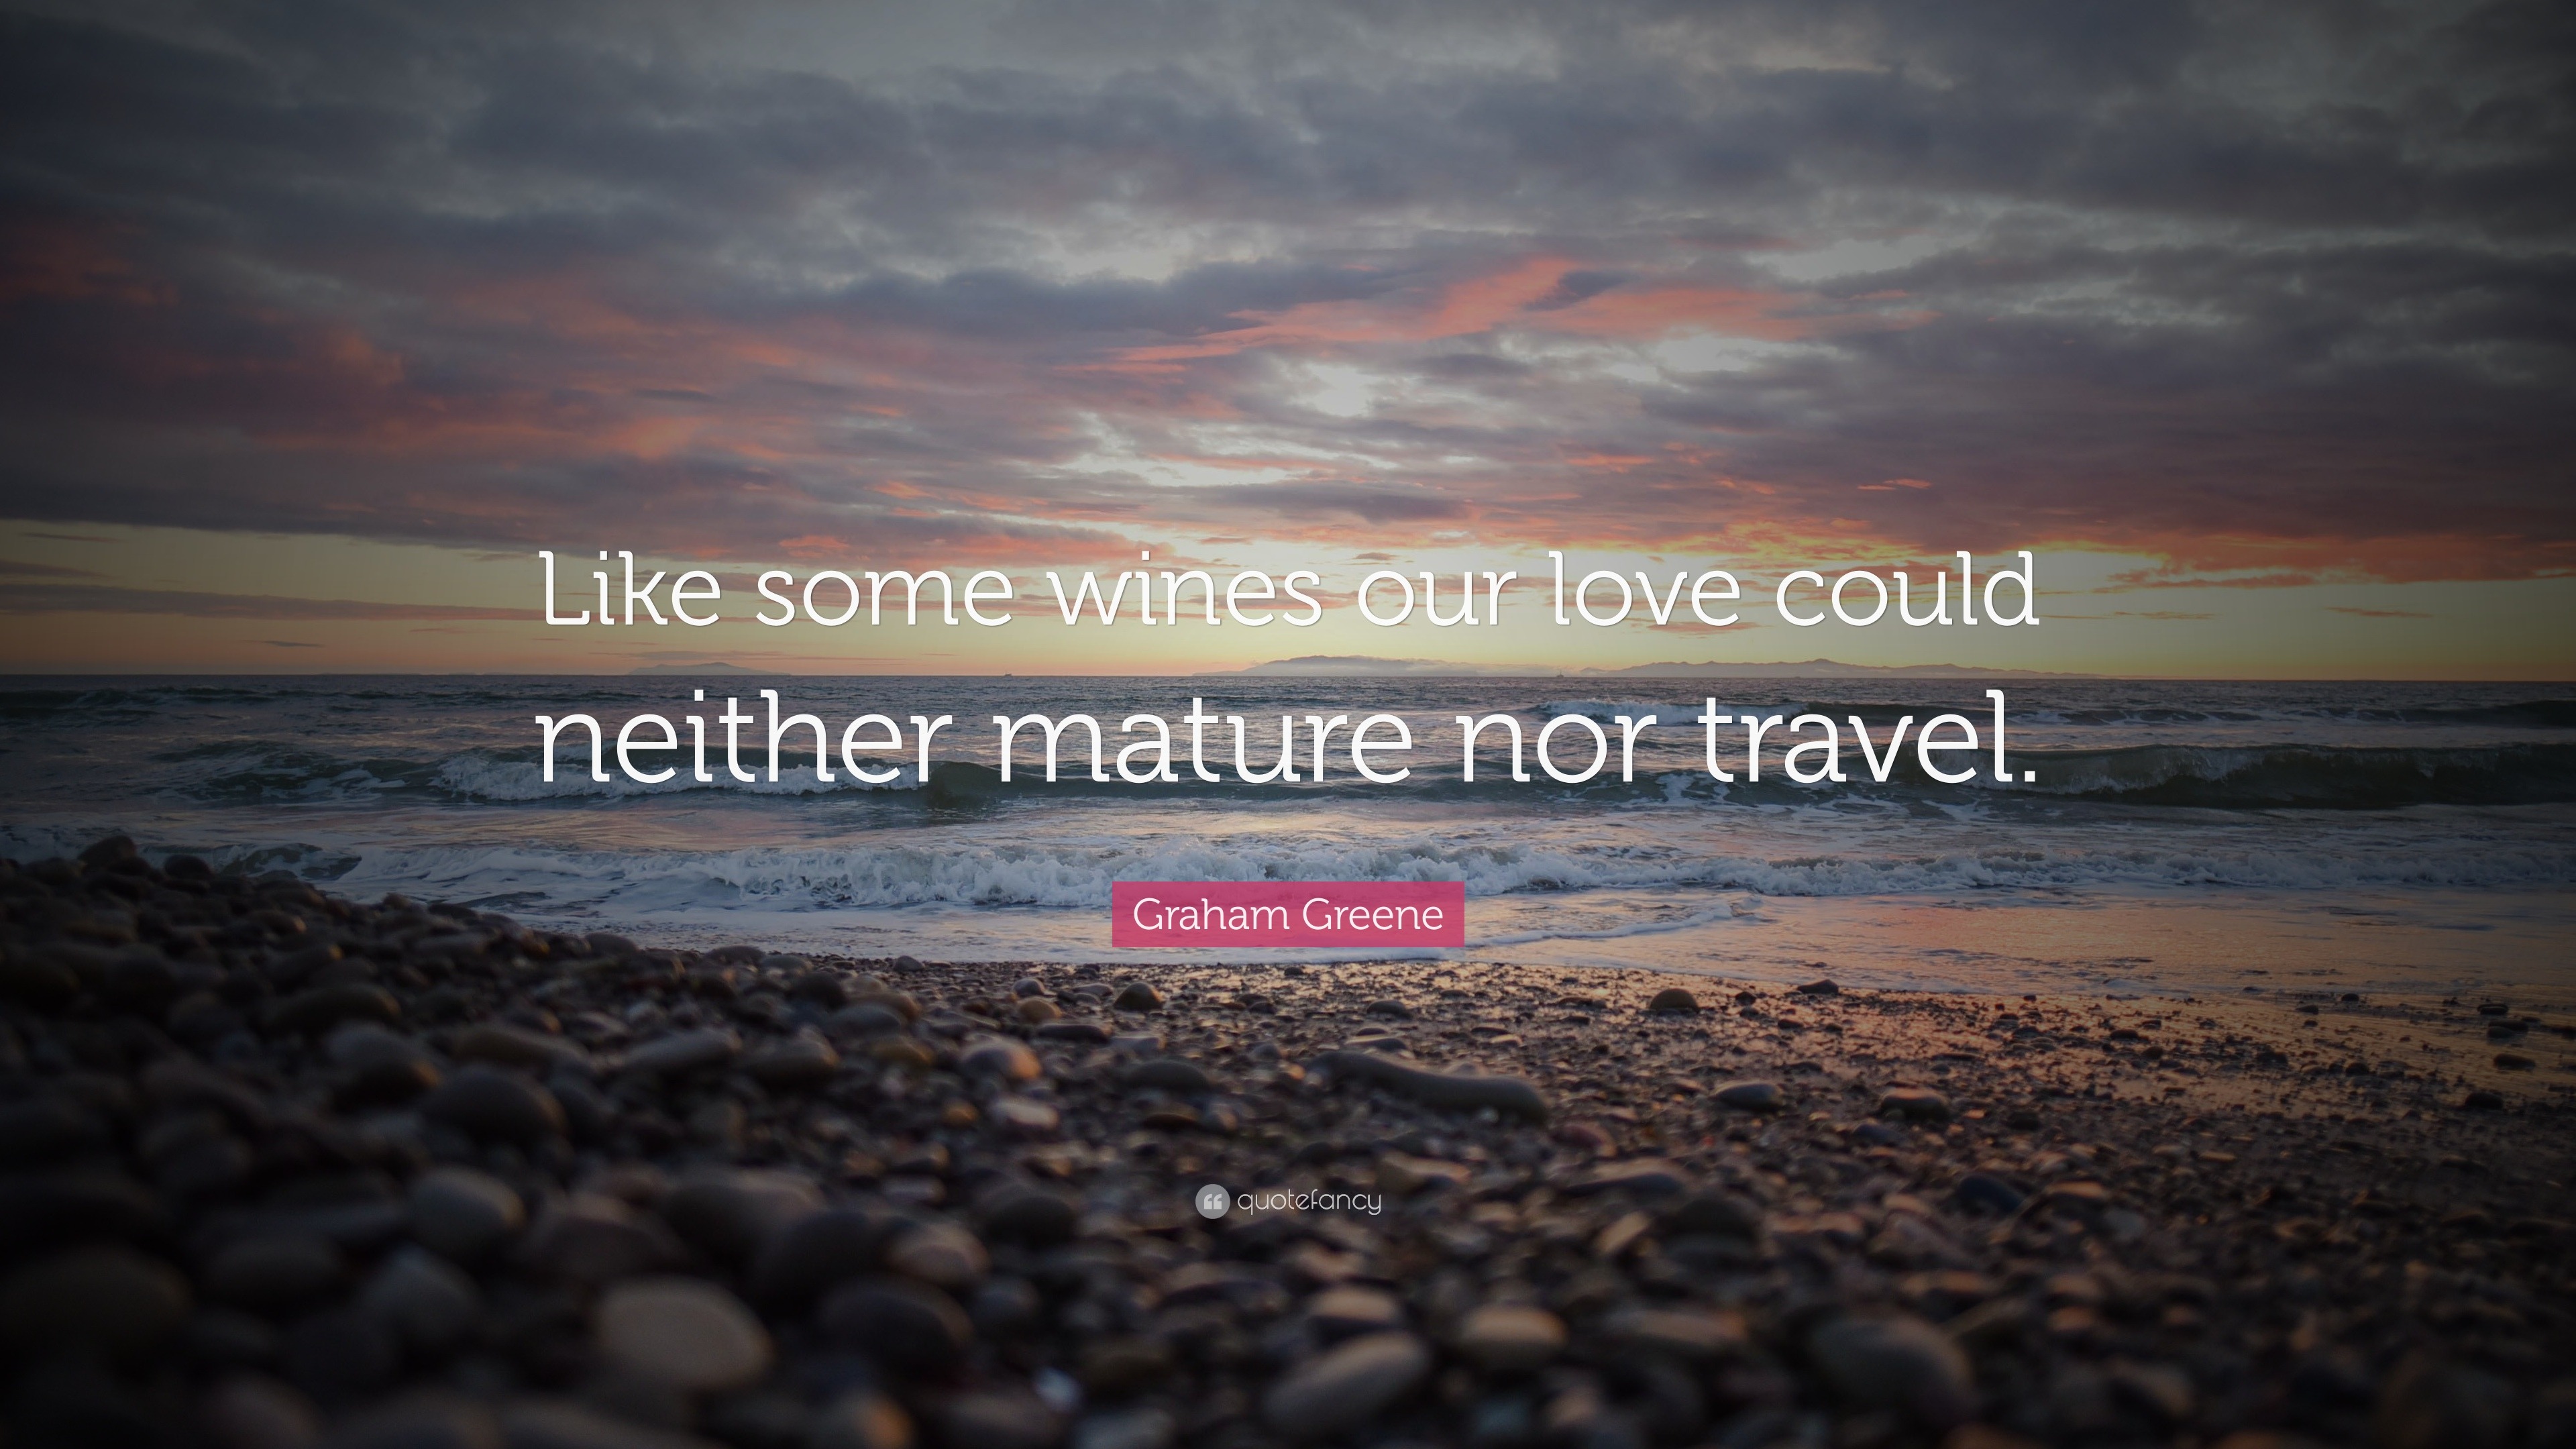 Graham Greene Quote “Like some wines our love could neither mature nor travel